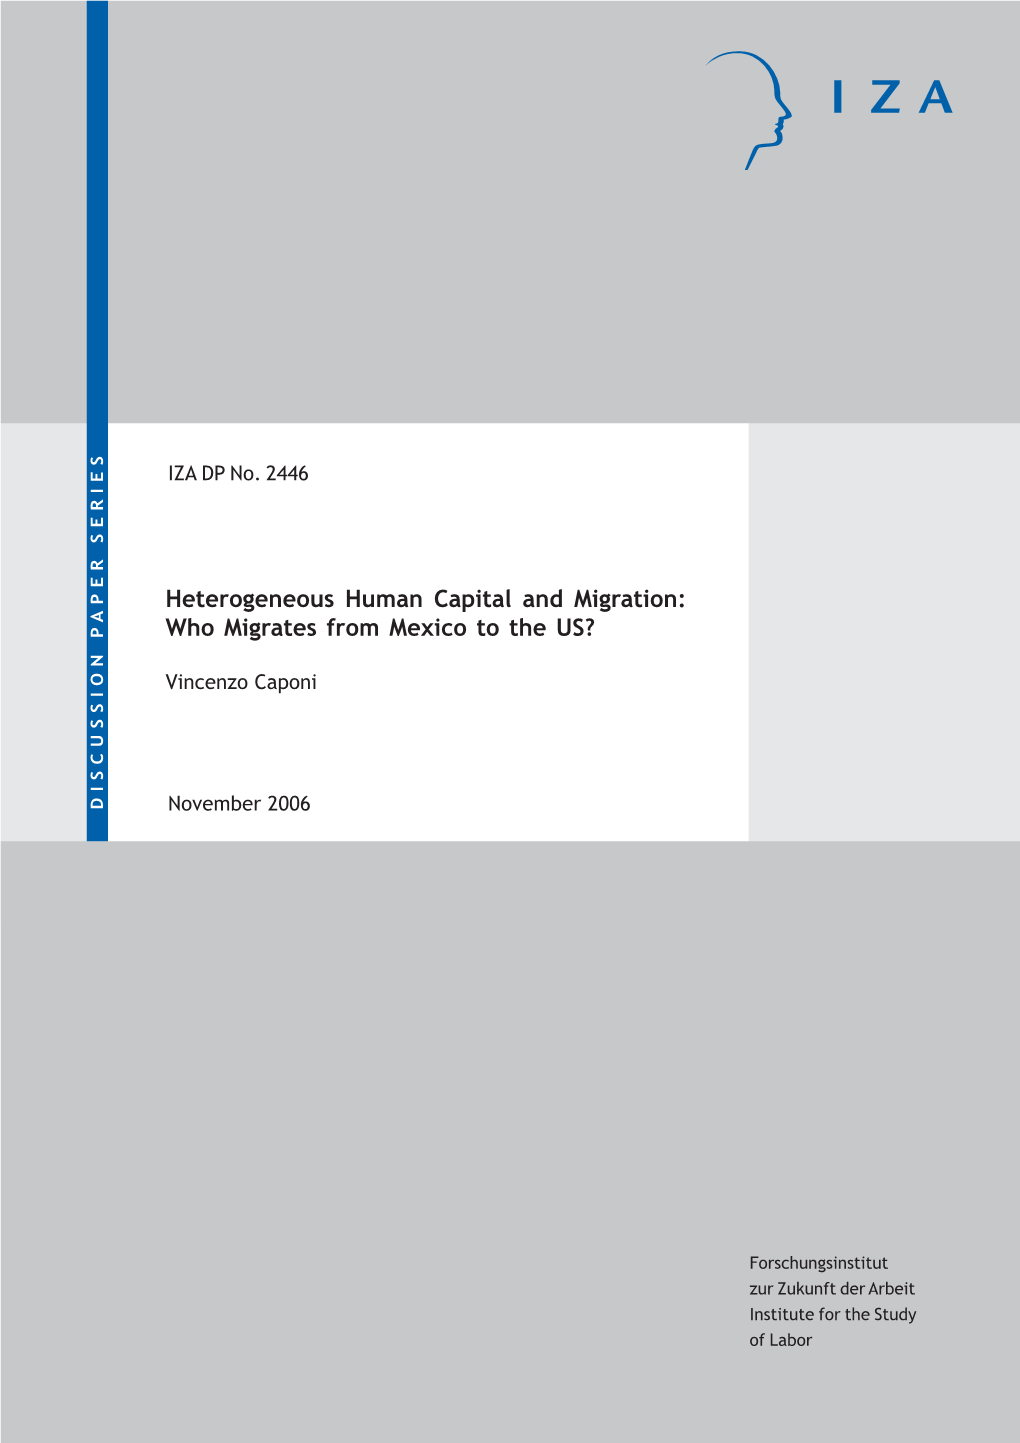 Heterogeneous Human Capital and Migration: Who Migrates from Mexico to the US?